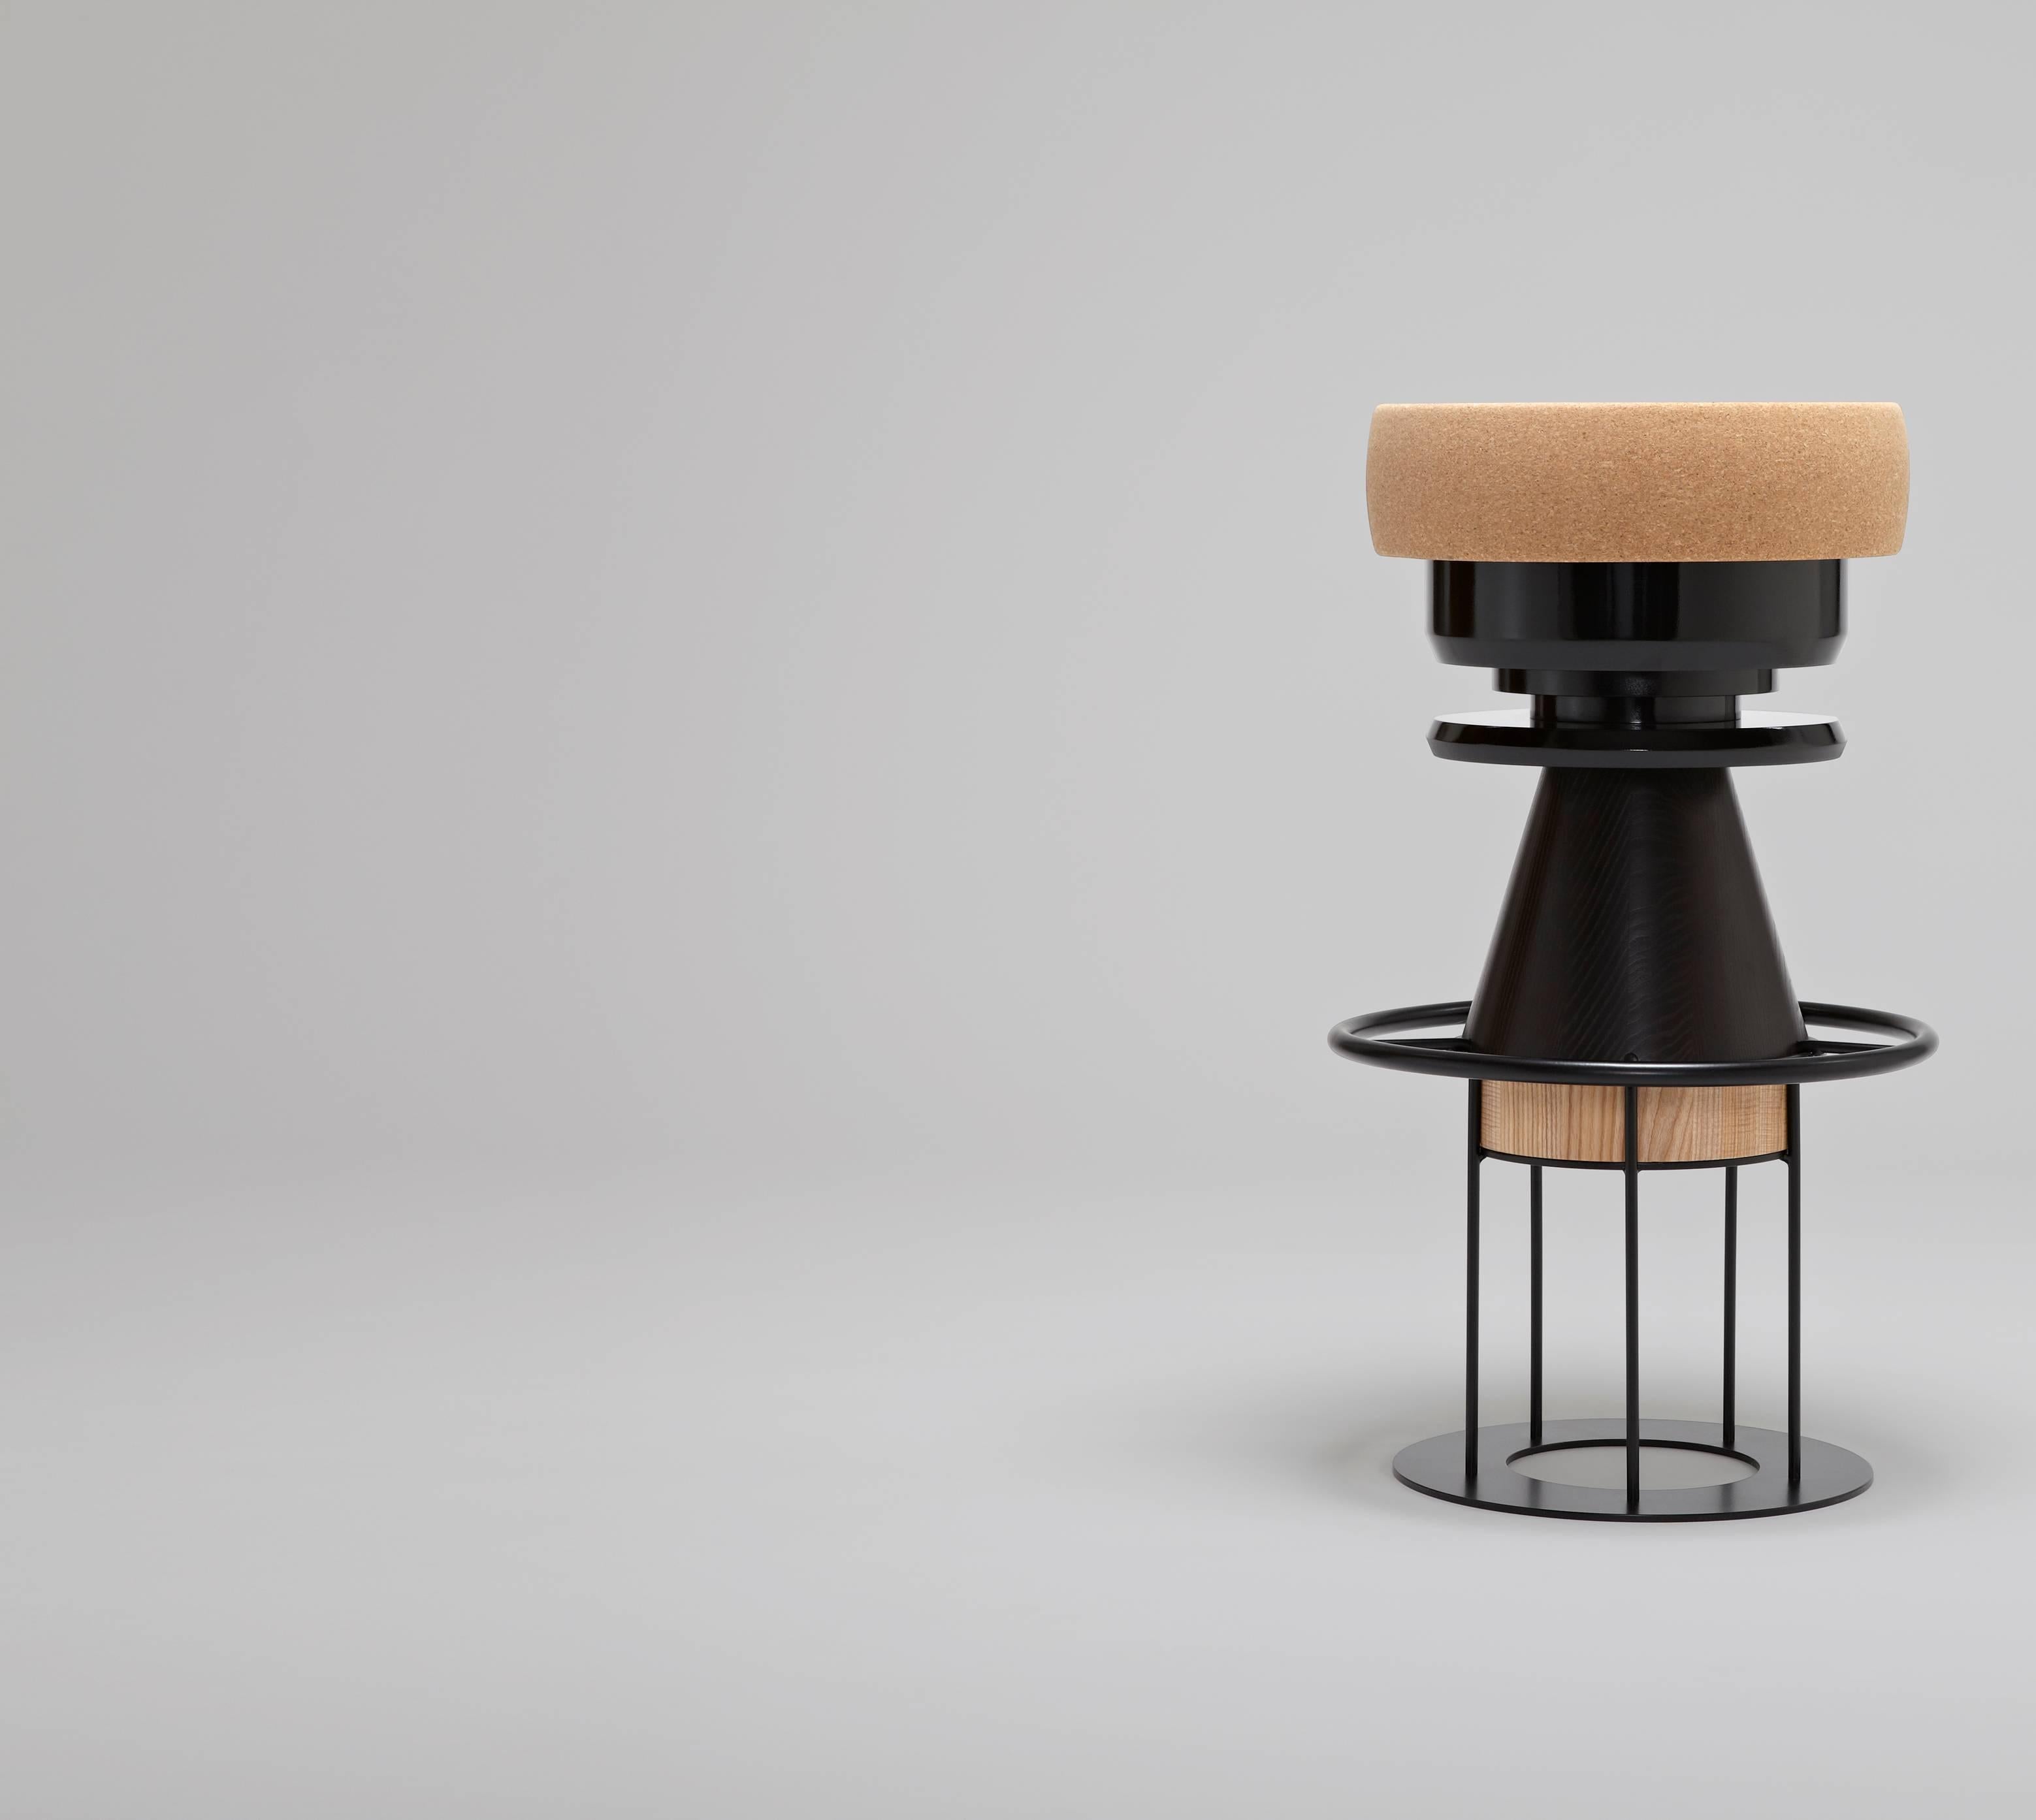 Black Tembo stool, note design studio

Measures: Height 19 inches (low stool) or 30.3 inches (high stool)
Diameter 14 inches
Weight 30.8 lbs (low stool) or 37.5 lbs (high stool)

Materials and construction: Lacquered steel structure, solid